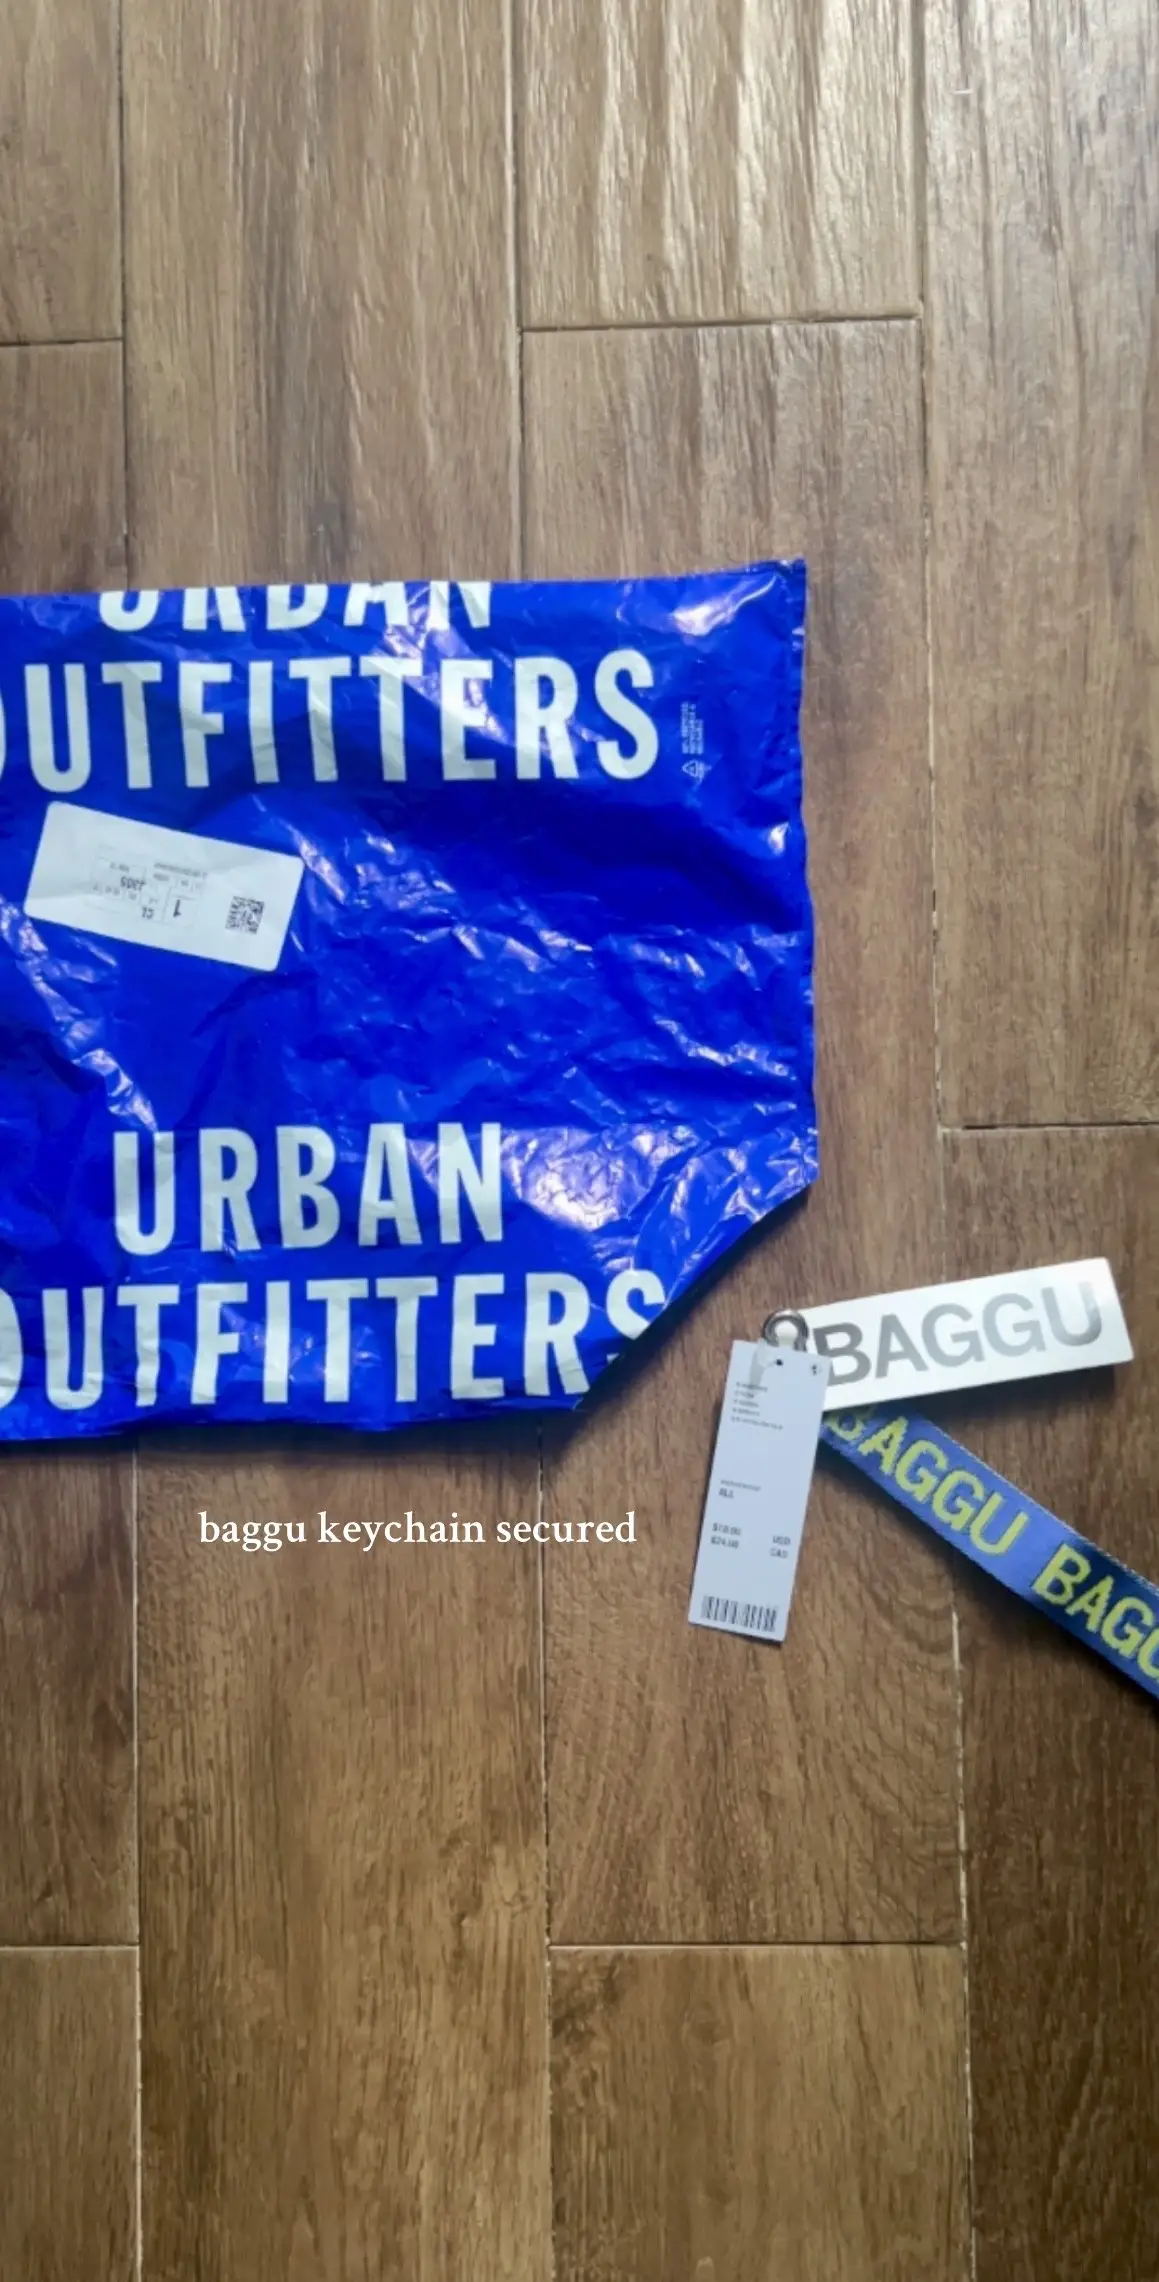 have been dying to get my hands on baggu’s 1st keychain they came out with and was never able to so when I saw urban came out with this one, I was so geeked!! She’s so cute!! #urbanoutfitters #baggukeychain #urbanoutfittersexclusive #latinacreator #unboxing #newpackage #urbanoutfitterspackage